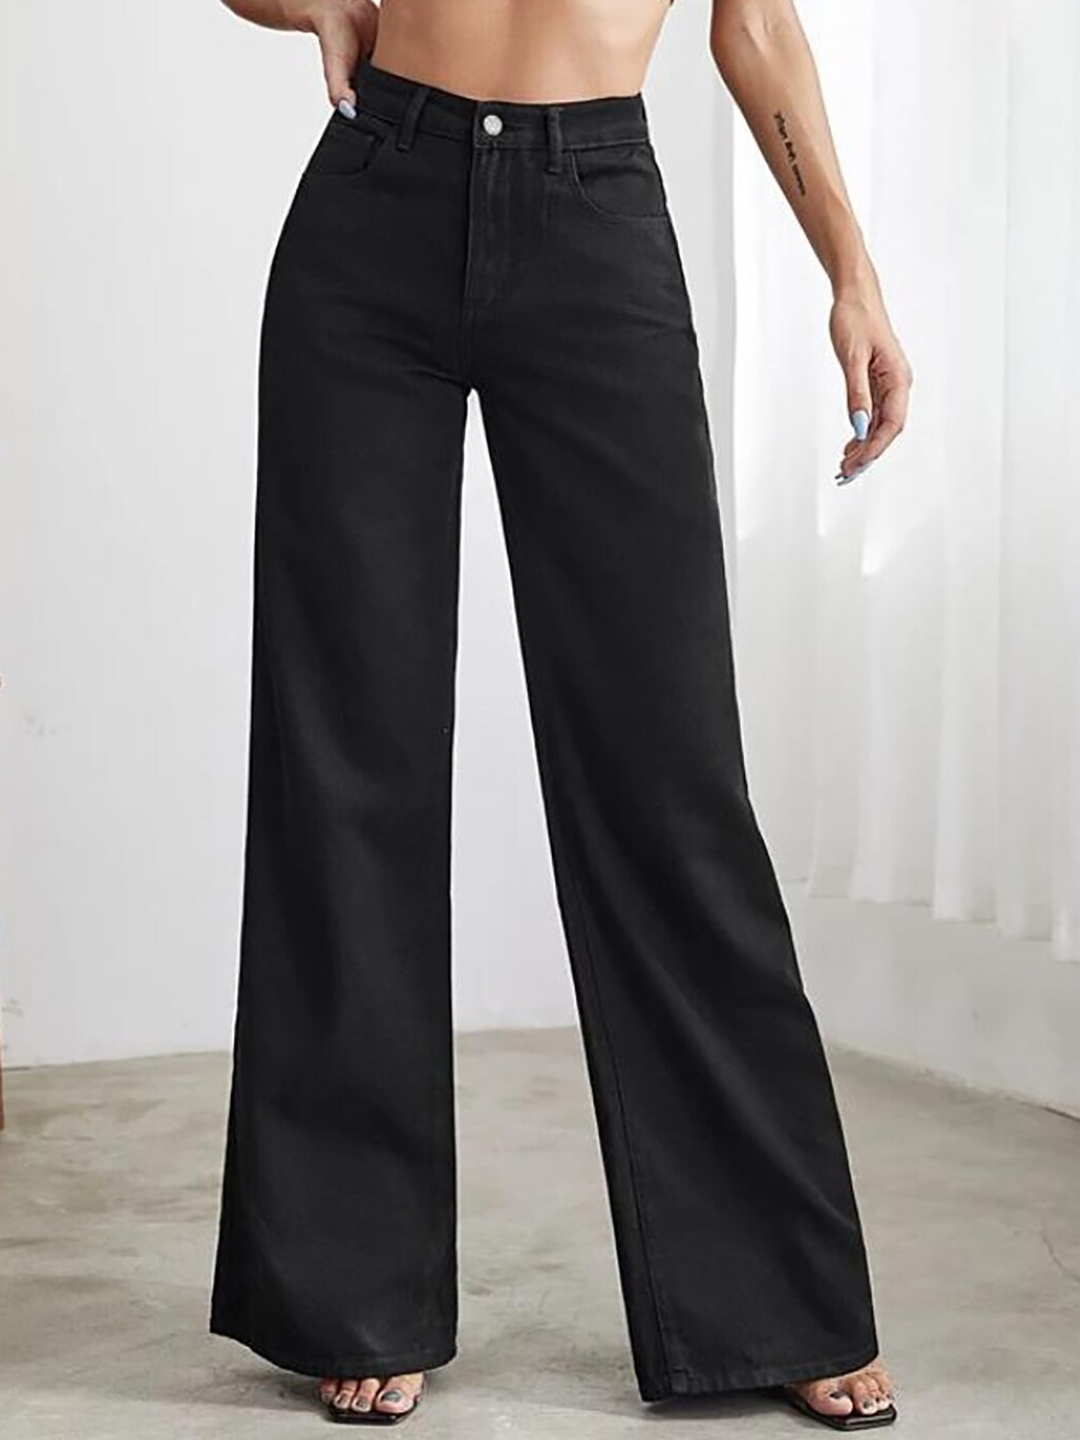 Aggregate more than 71 women's straight fit pants super hot - in.eteachers